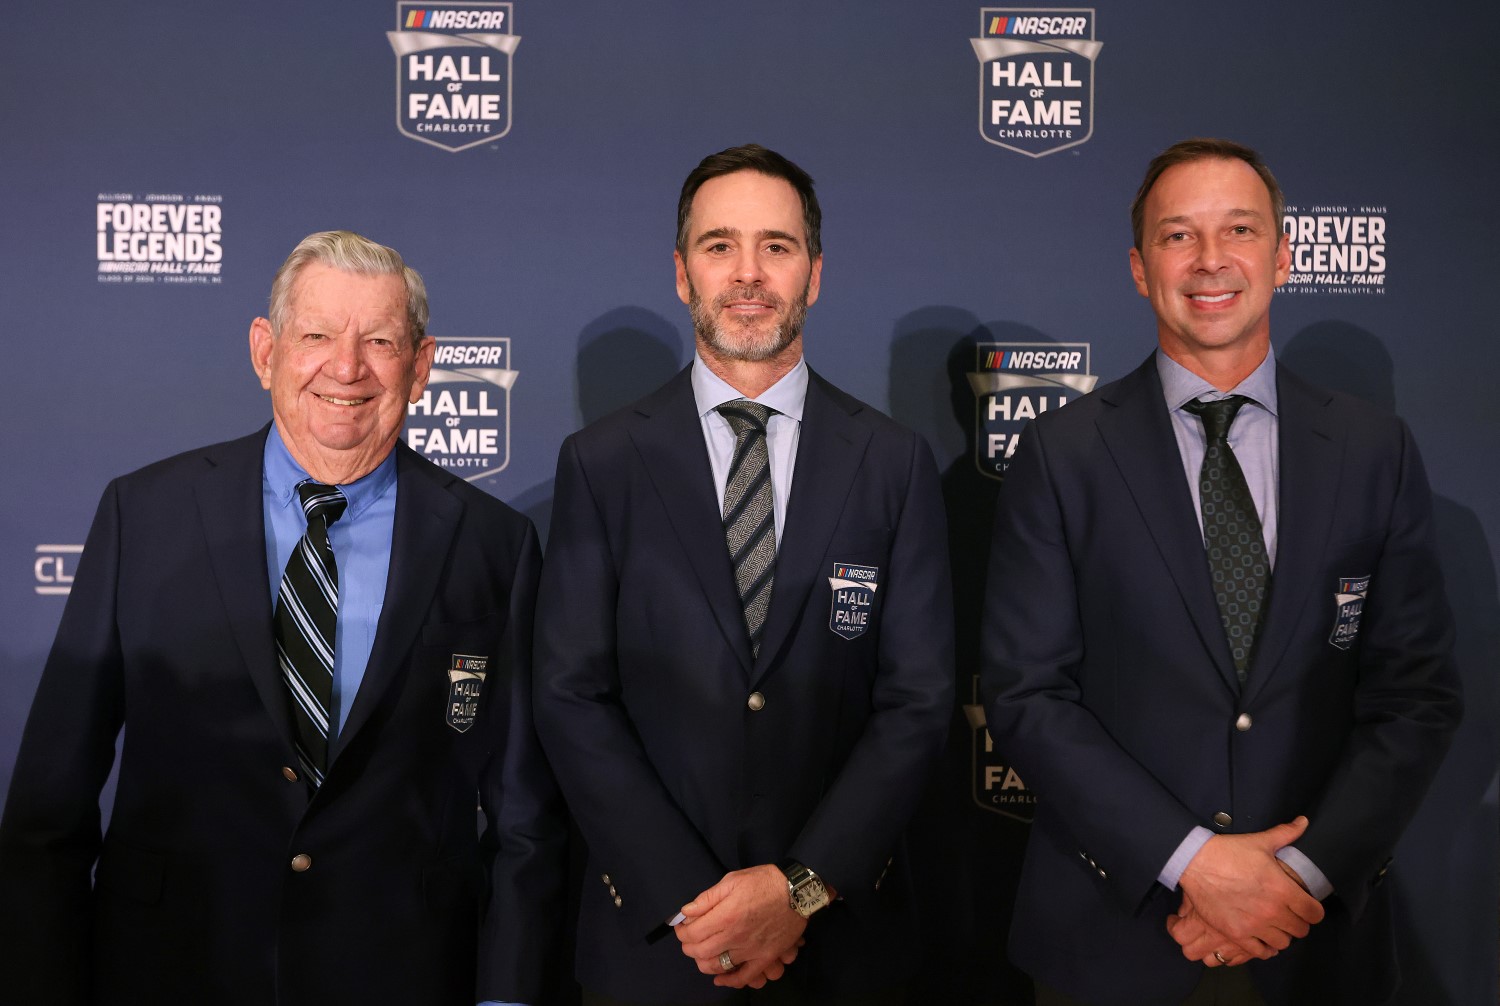 (L-R) NASCAR Hall of Fame inductees Donnie Allison, Jimmie Johnson and Chad Knaus pose for photos during the NHOF Class of 2024 Blue Jacket Ceremony at NASCAR Hall of Fame on January 18, 2024 in Charlotte, North Carolina. (Photo by David Jensen/Getty Images)